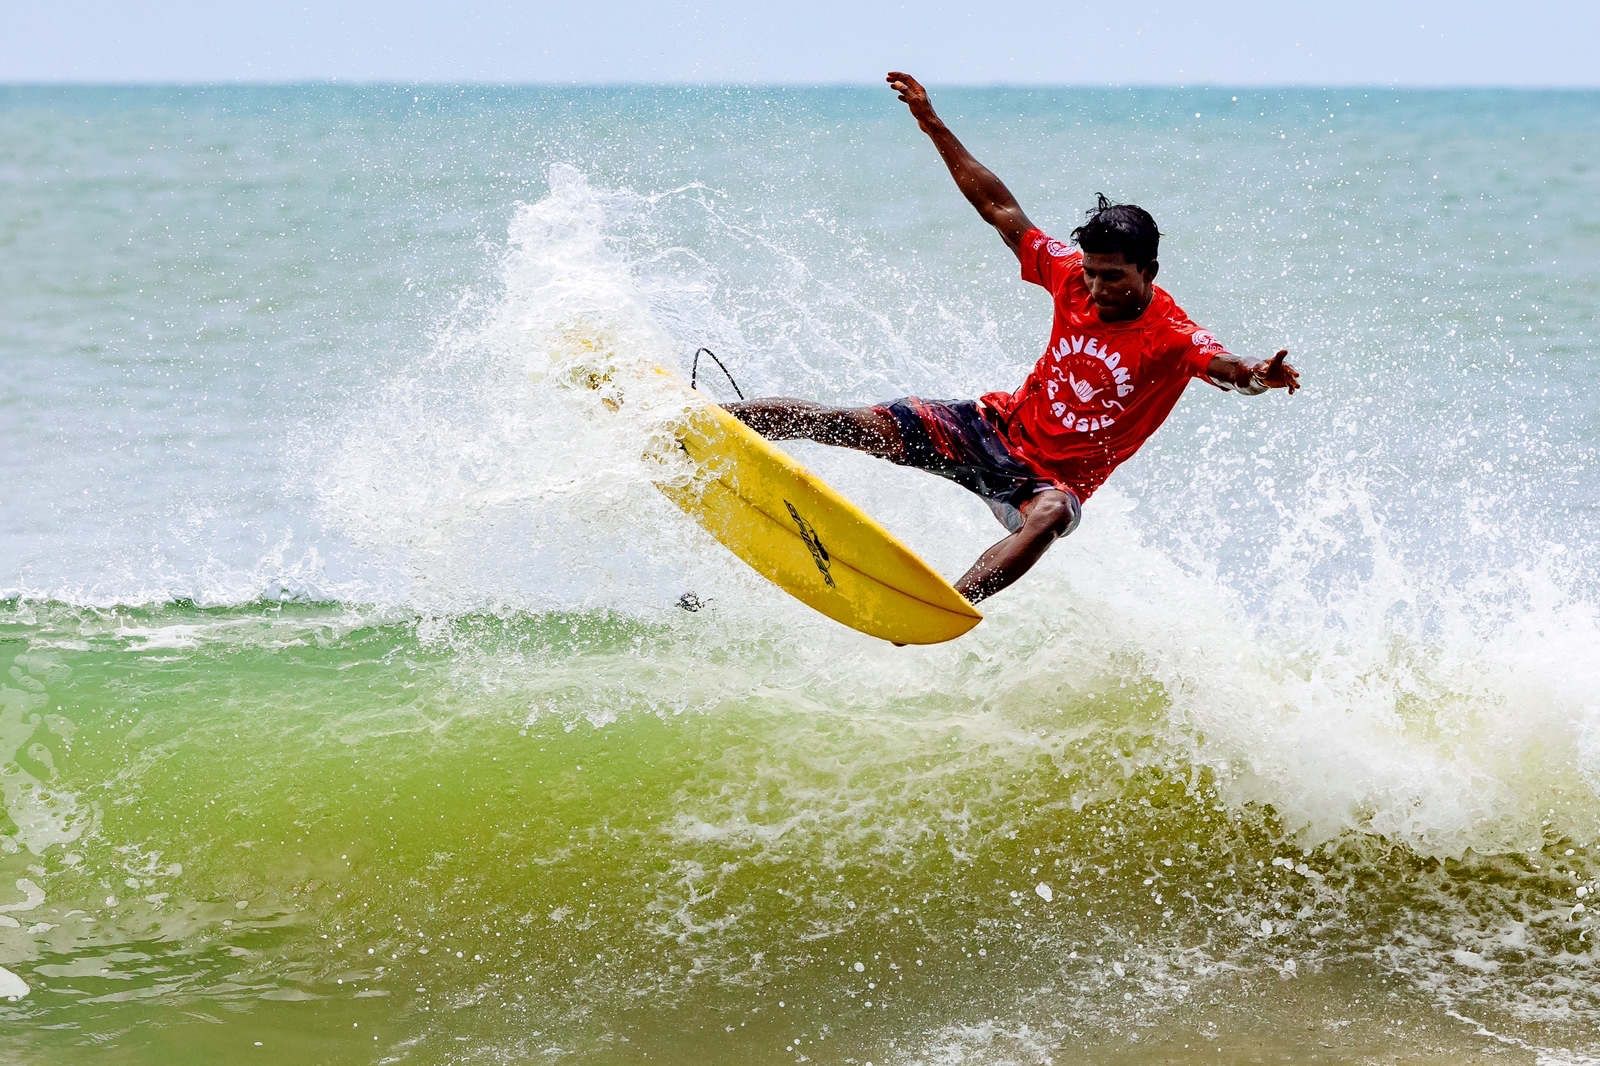 Ajeesh Ali, Sanjay Selvamani, Ramesh Budihal and Sivaraj Babu to debut for India · ISA World Surfing Games is an Olympic Qualifier event for Paris